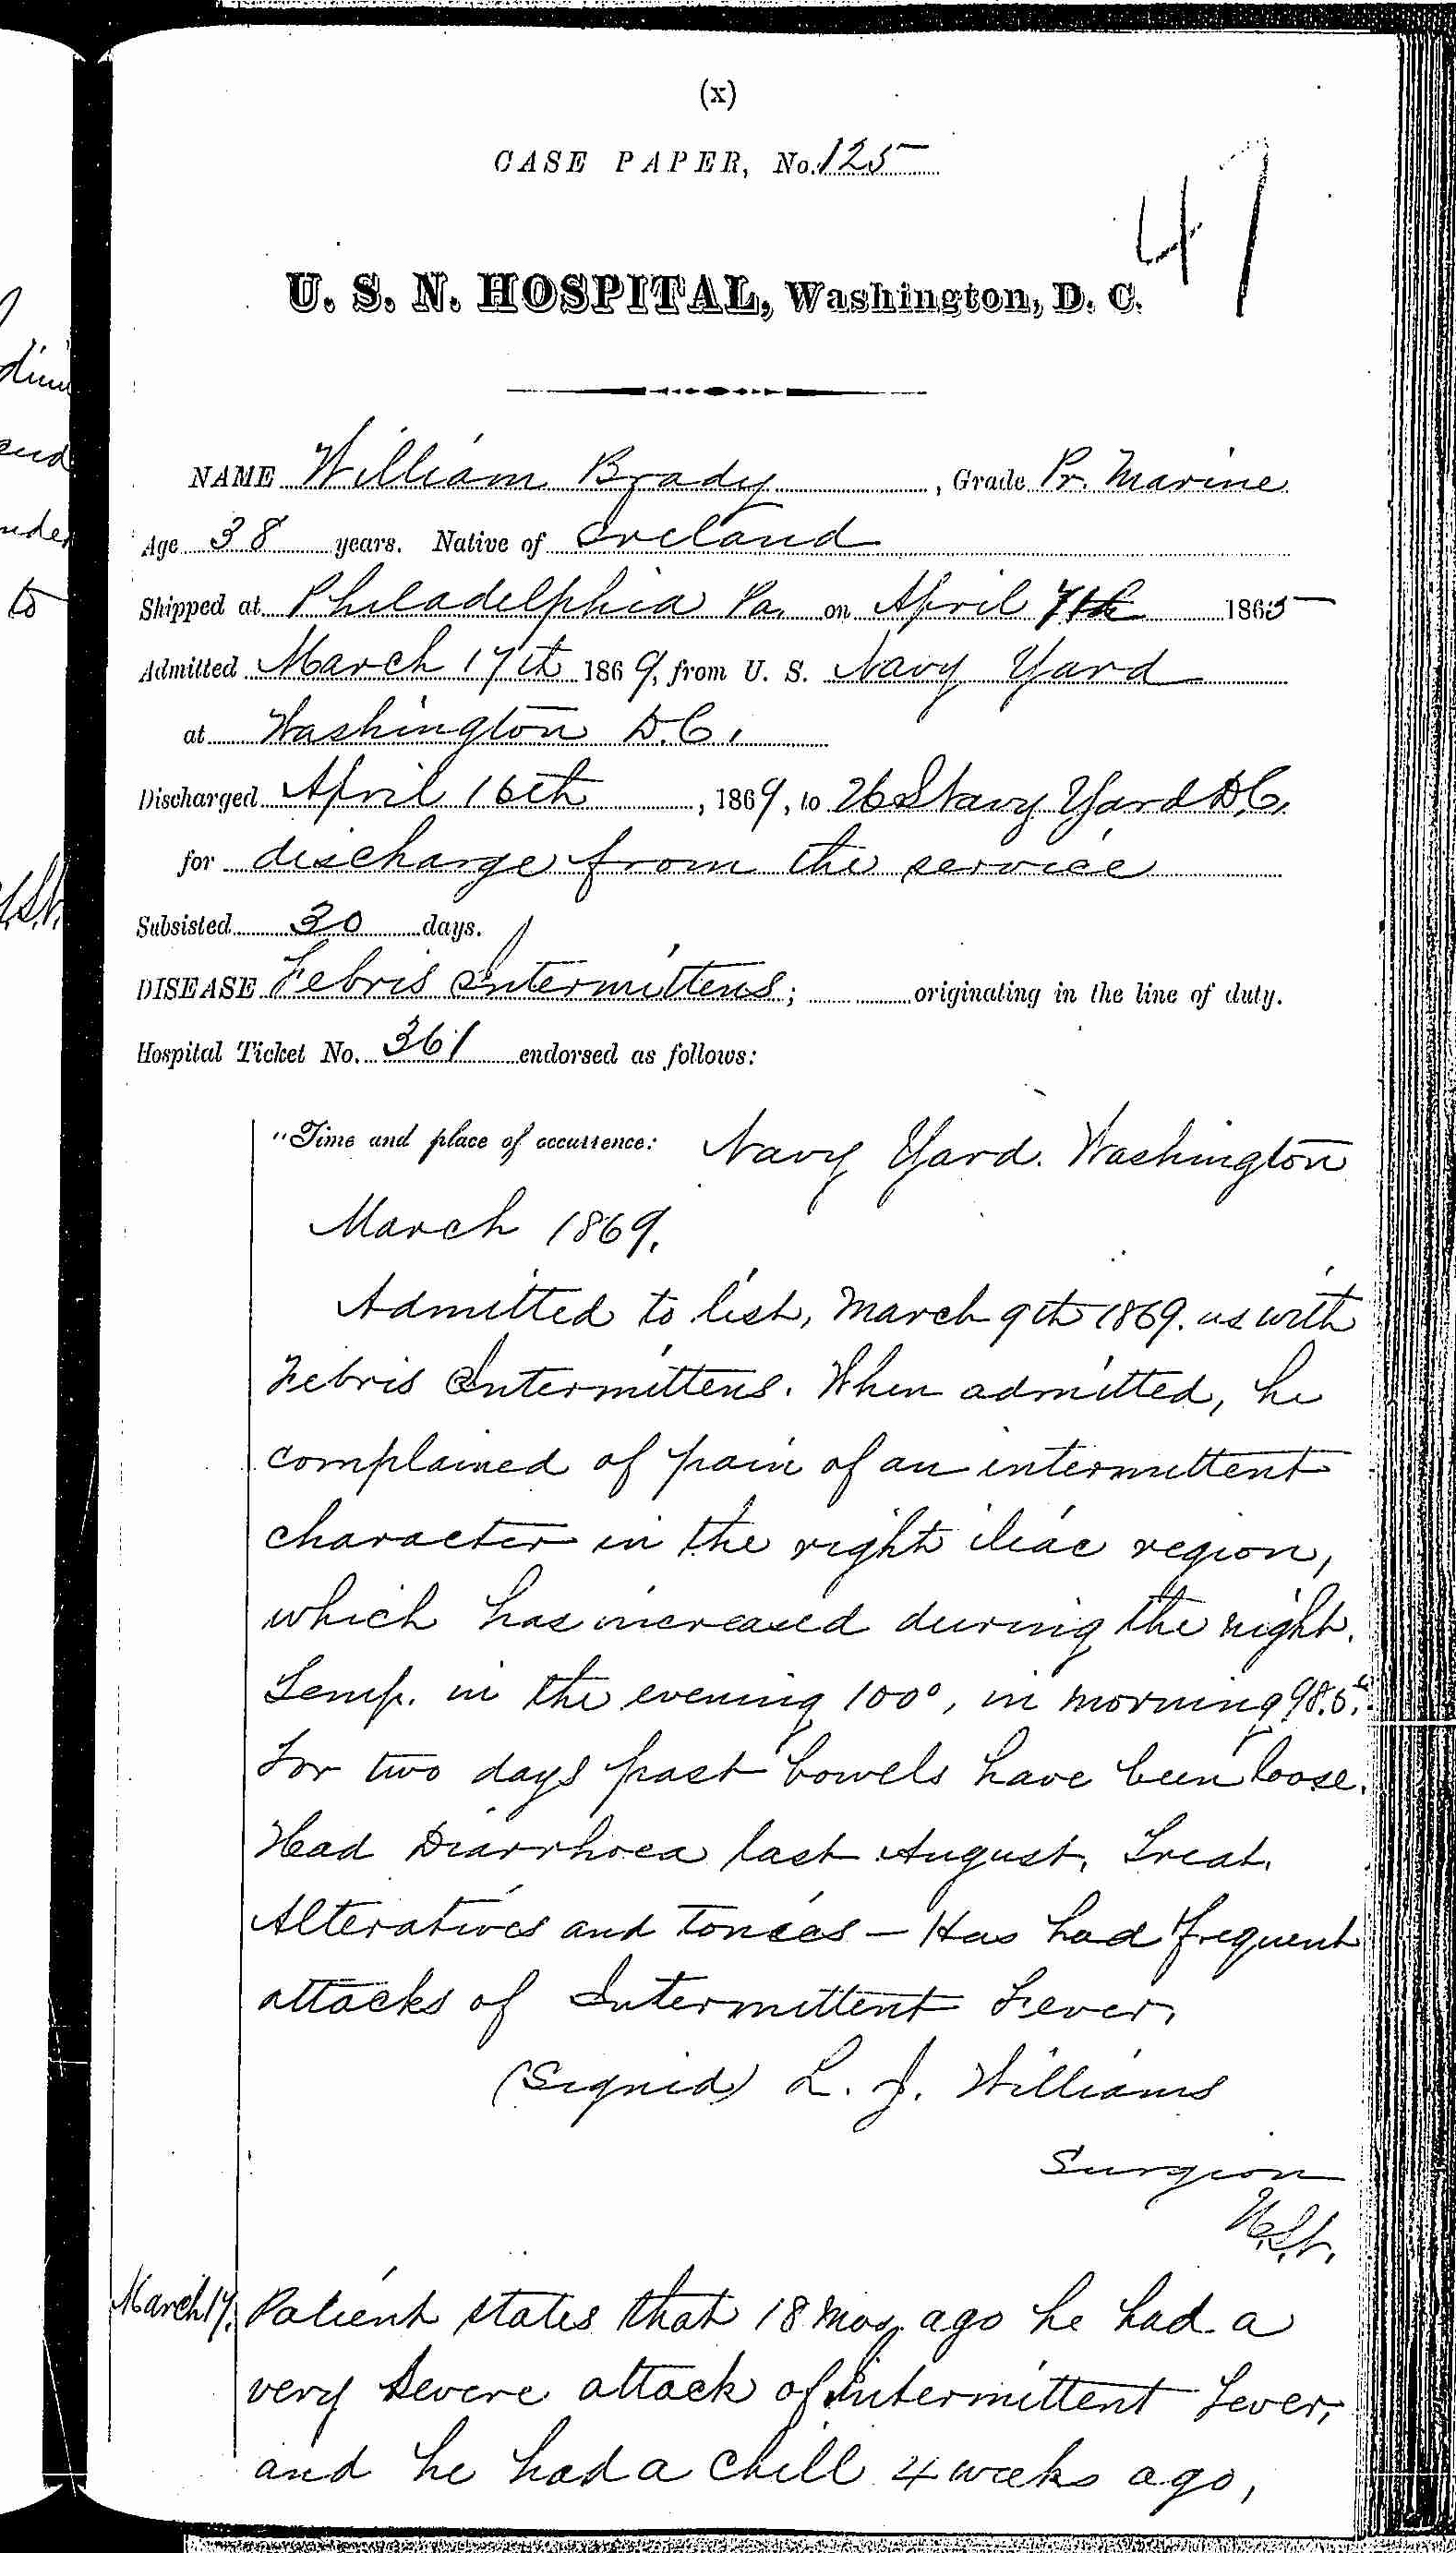 Entry for William Brady (page 1 of 5) in the log Hospital Tickets and Case Papers - Naval Hospital - Washington, D.C. - 1868-69